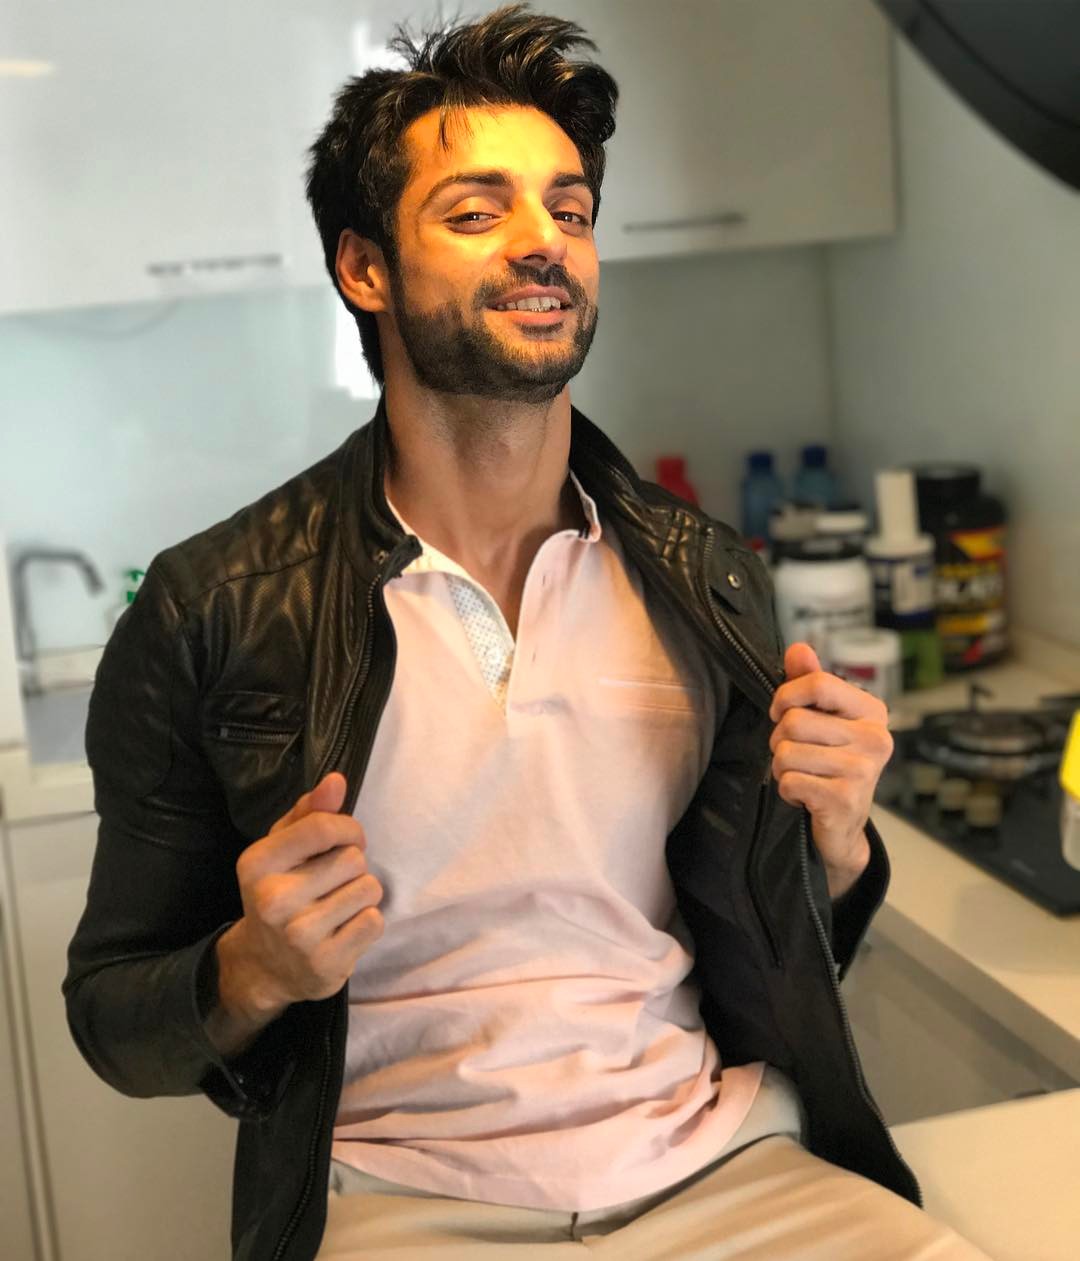 Karan Wahi, Dil Mil Gayye Actor Reacts To Reports Of His Arrest For Molesting A Model RVCJ Media